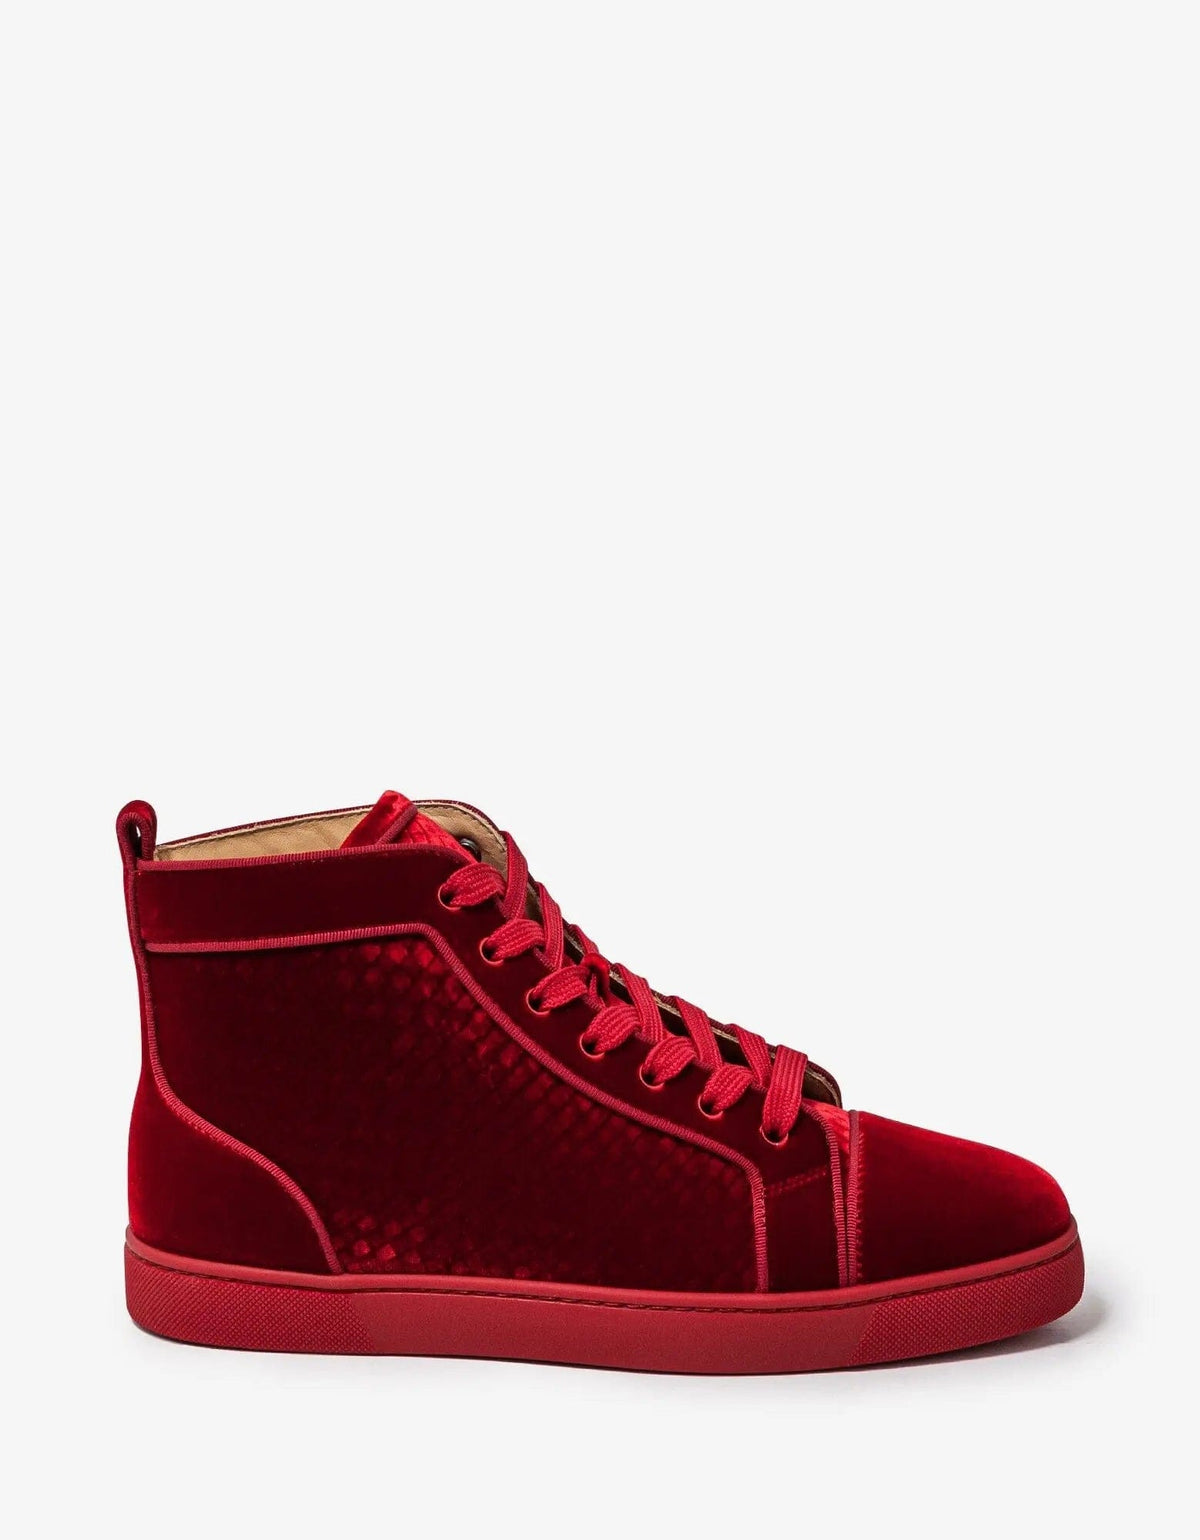 Christian Louboutin - Louis Orlato Red Velvet High Top Trainers -